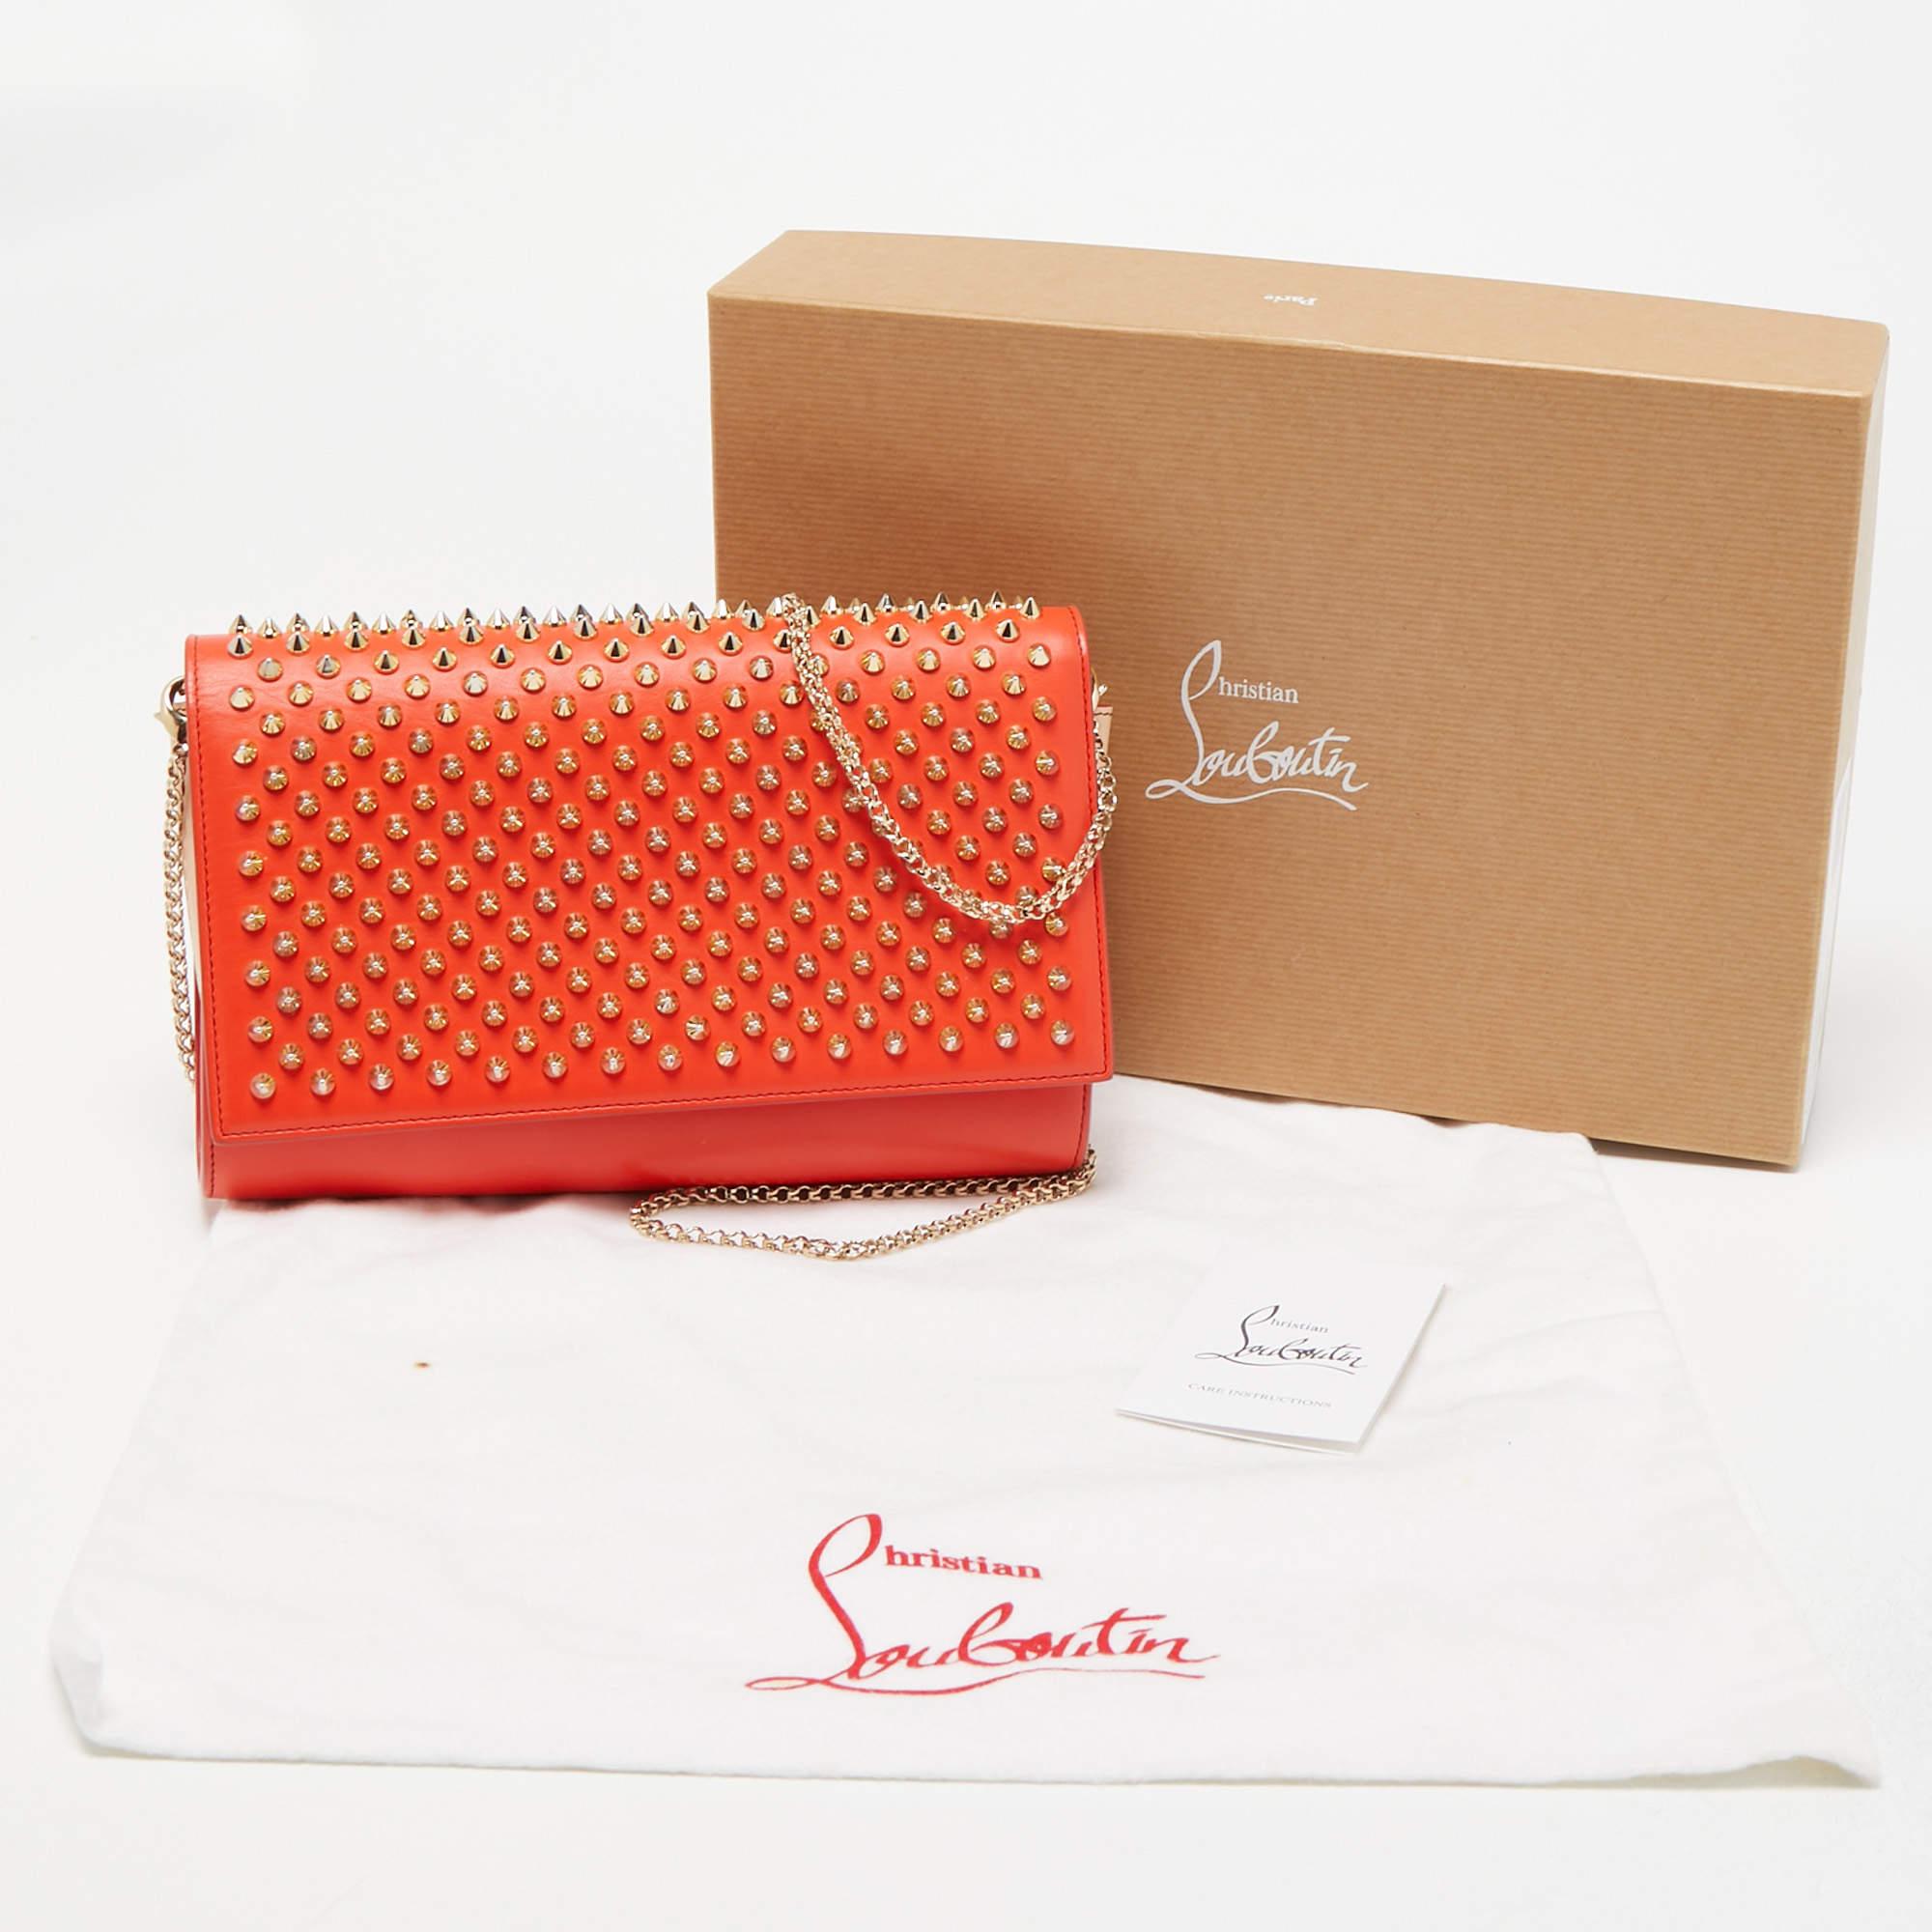 Christian Louboutin Orange Leather Paloma Spiked Chain Clutch 6